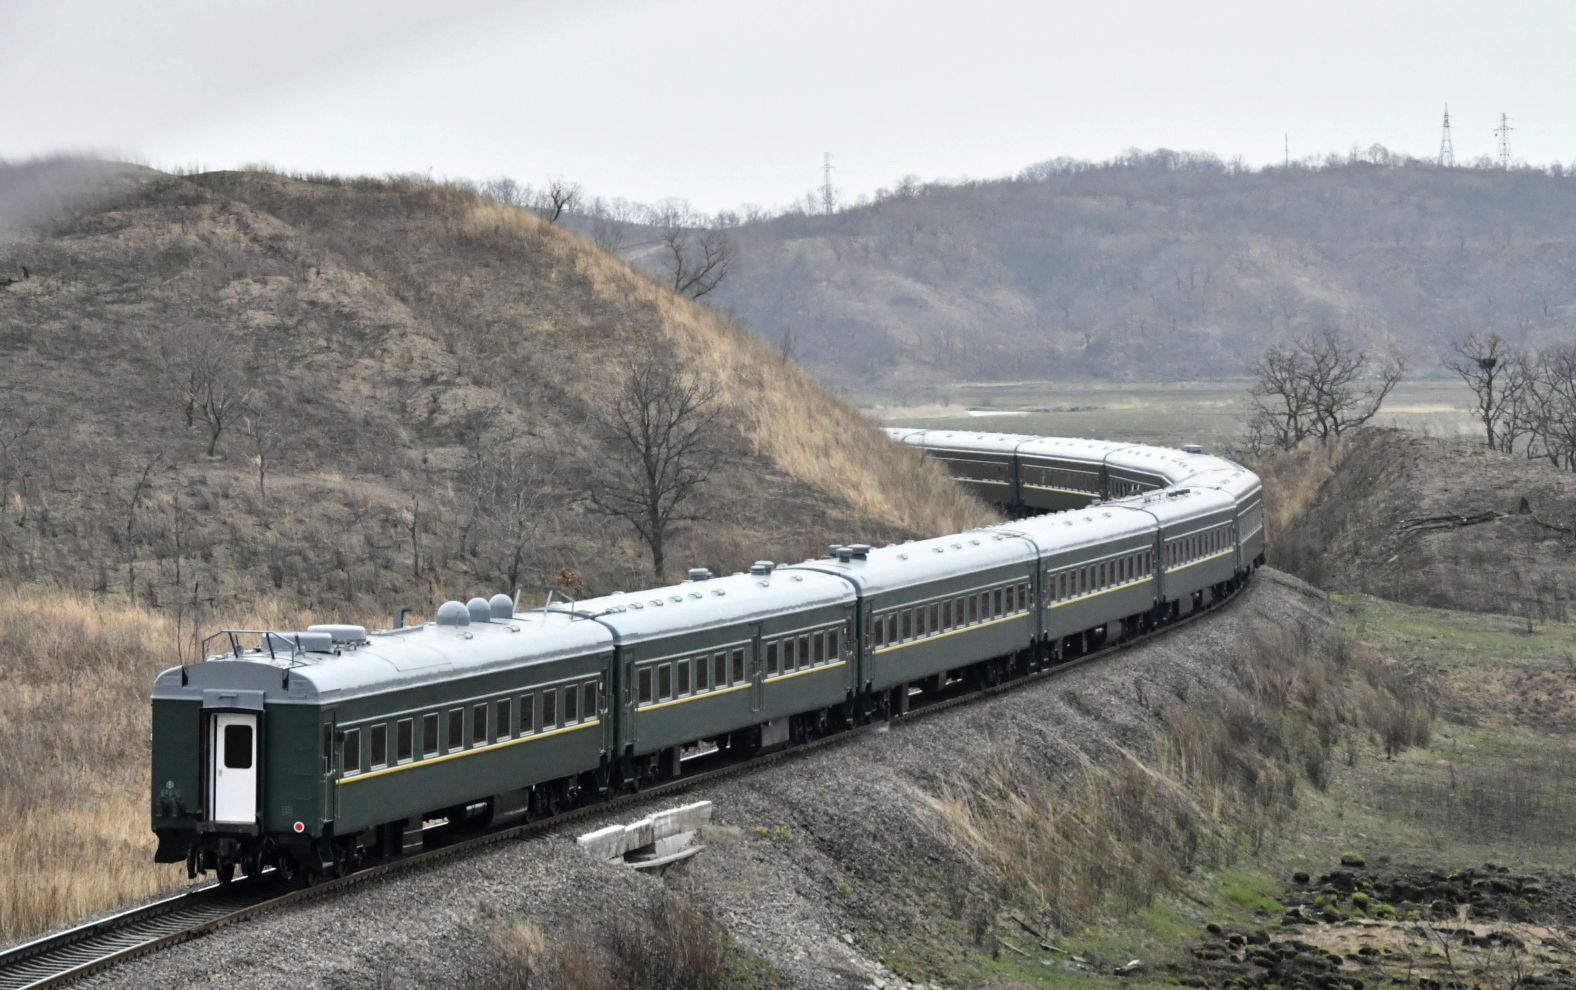 A train carrying North Korean leader Kim Jong Un runs in Khasan, a Russian border city with North Korea, on Wednesday, April 24, on its way to Vladivostok where Kim will hold his first summit with Russian President Vladimir Putin.